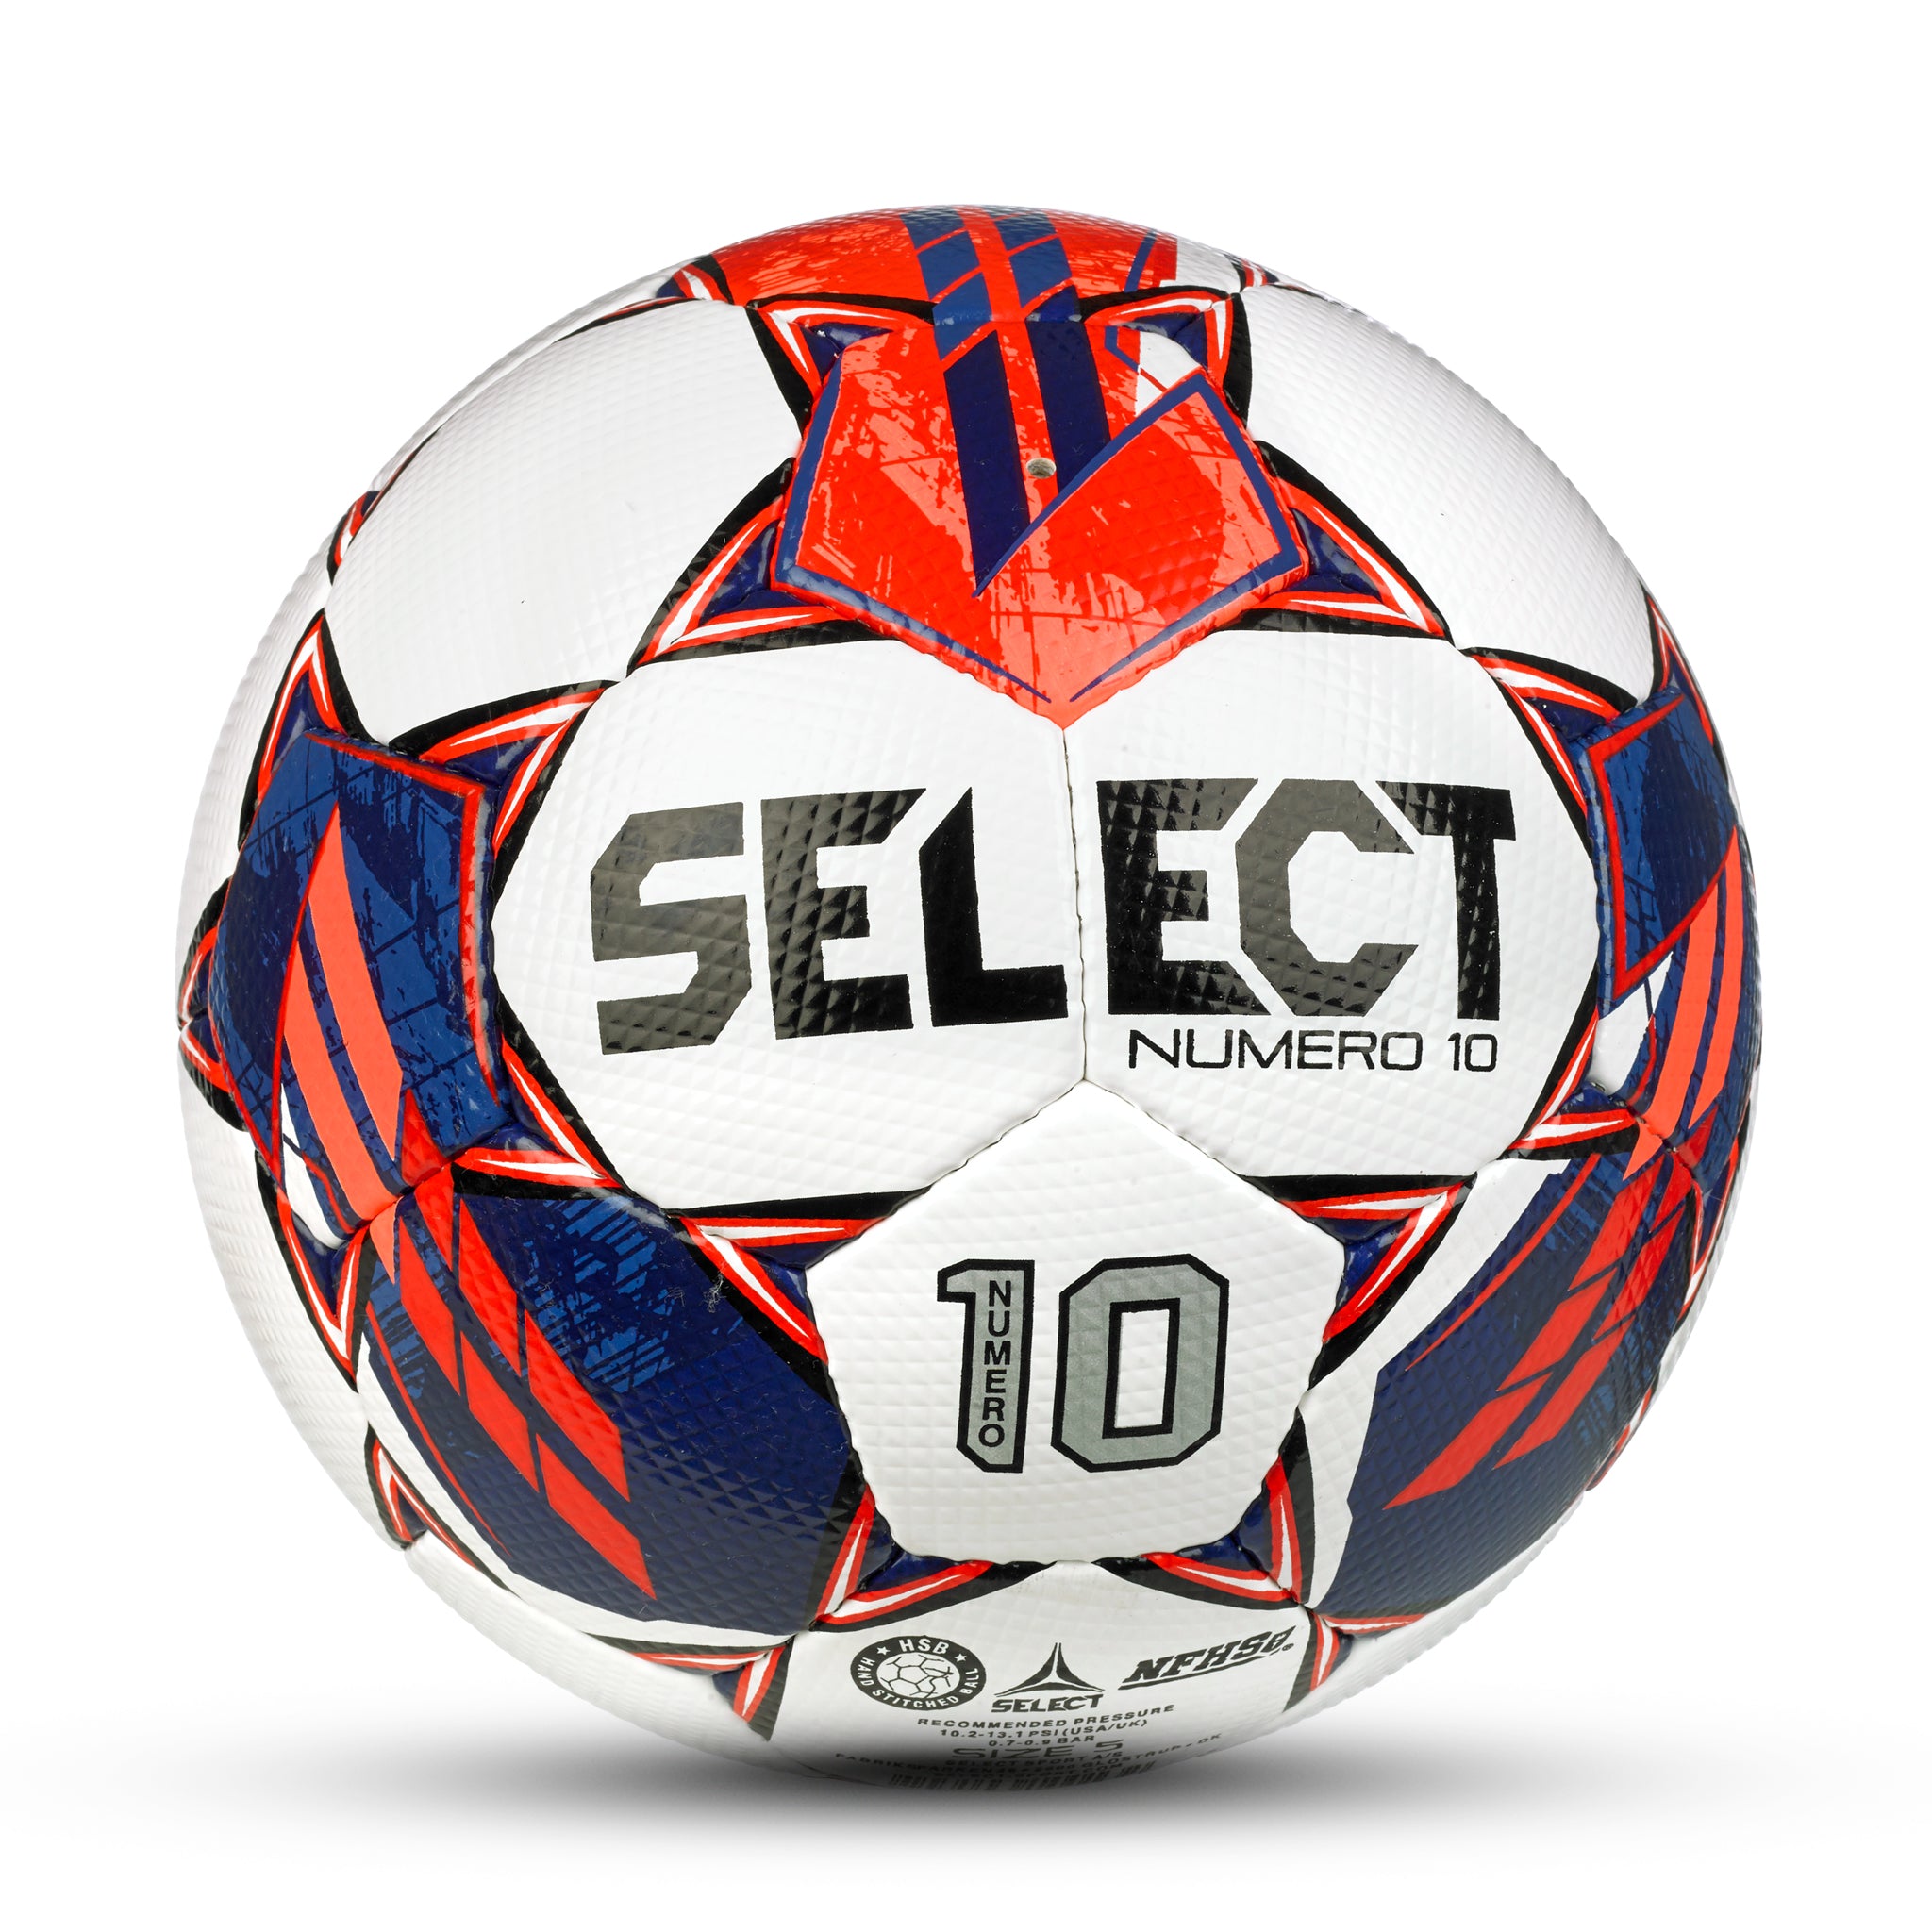 White club soccer ball #color_white/blue/red